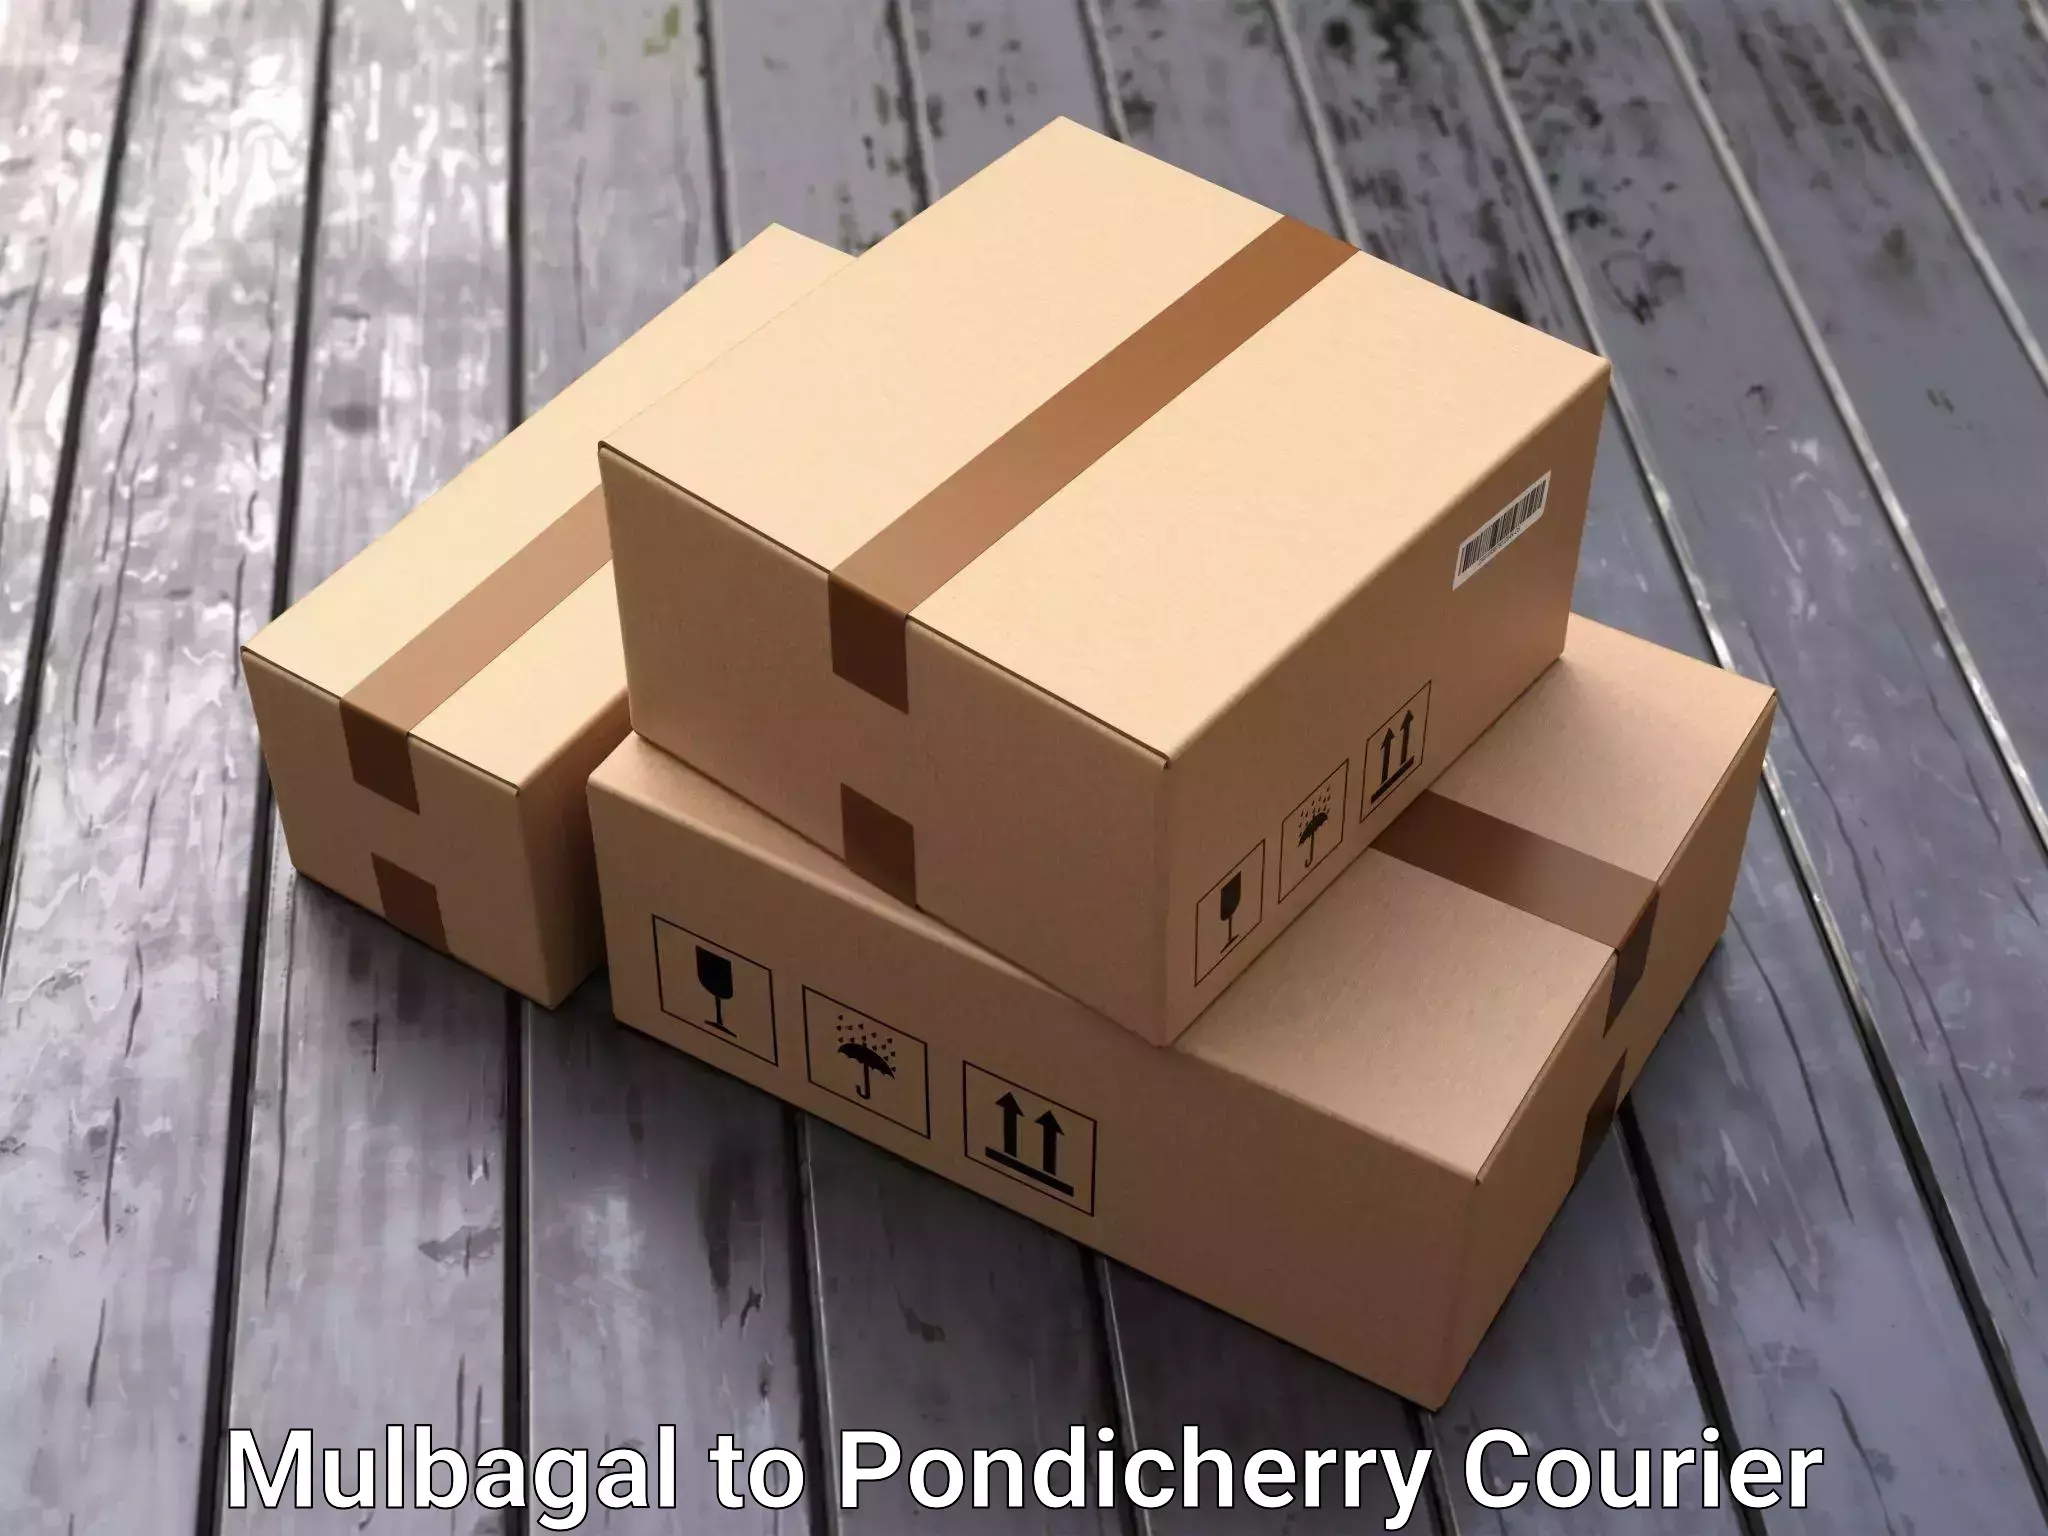 Professional moving company Mulbagal to Pondicherry